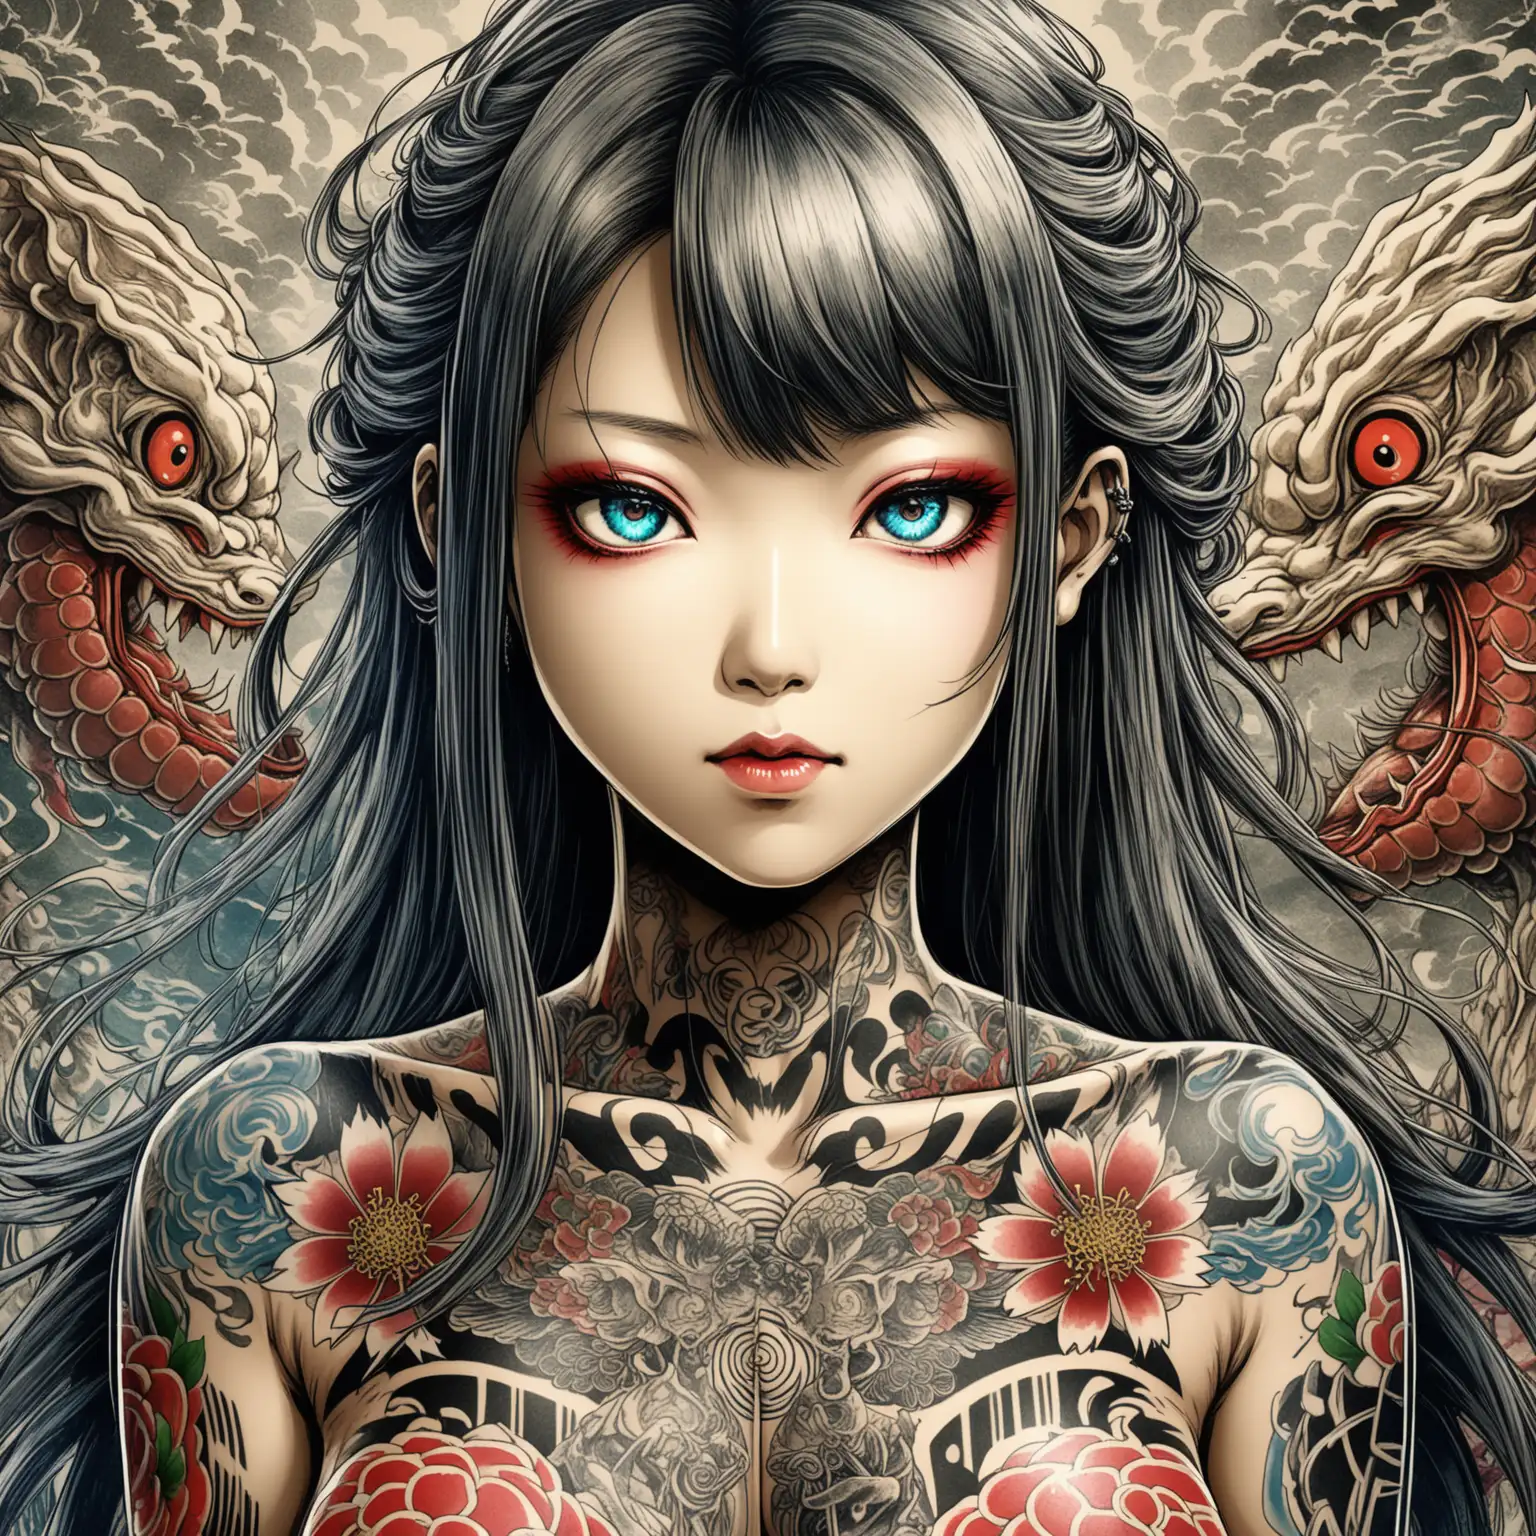 Japanese Woman with Stunning Tattoos and Hair in AmanoStyle Art